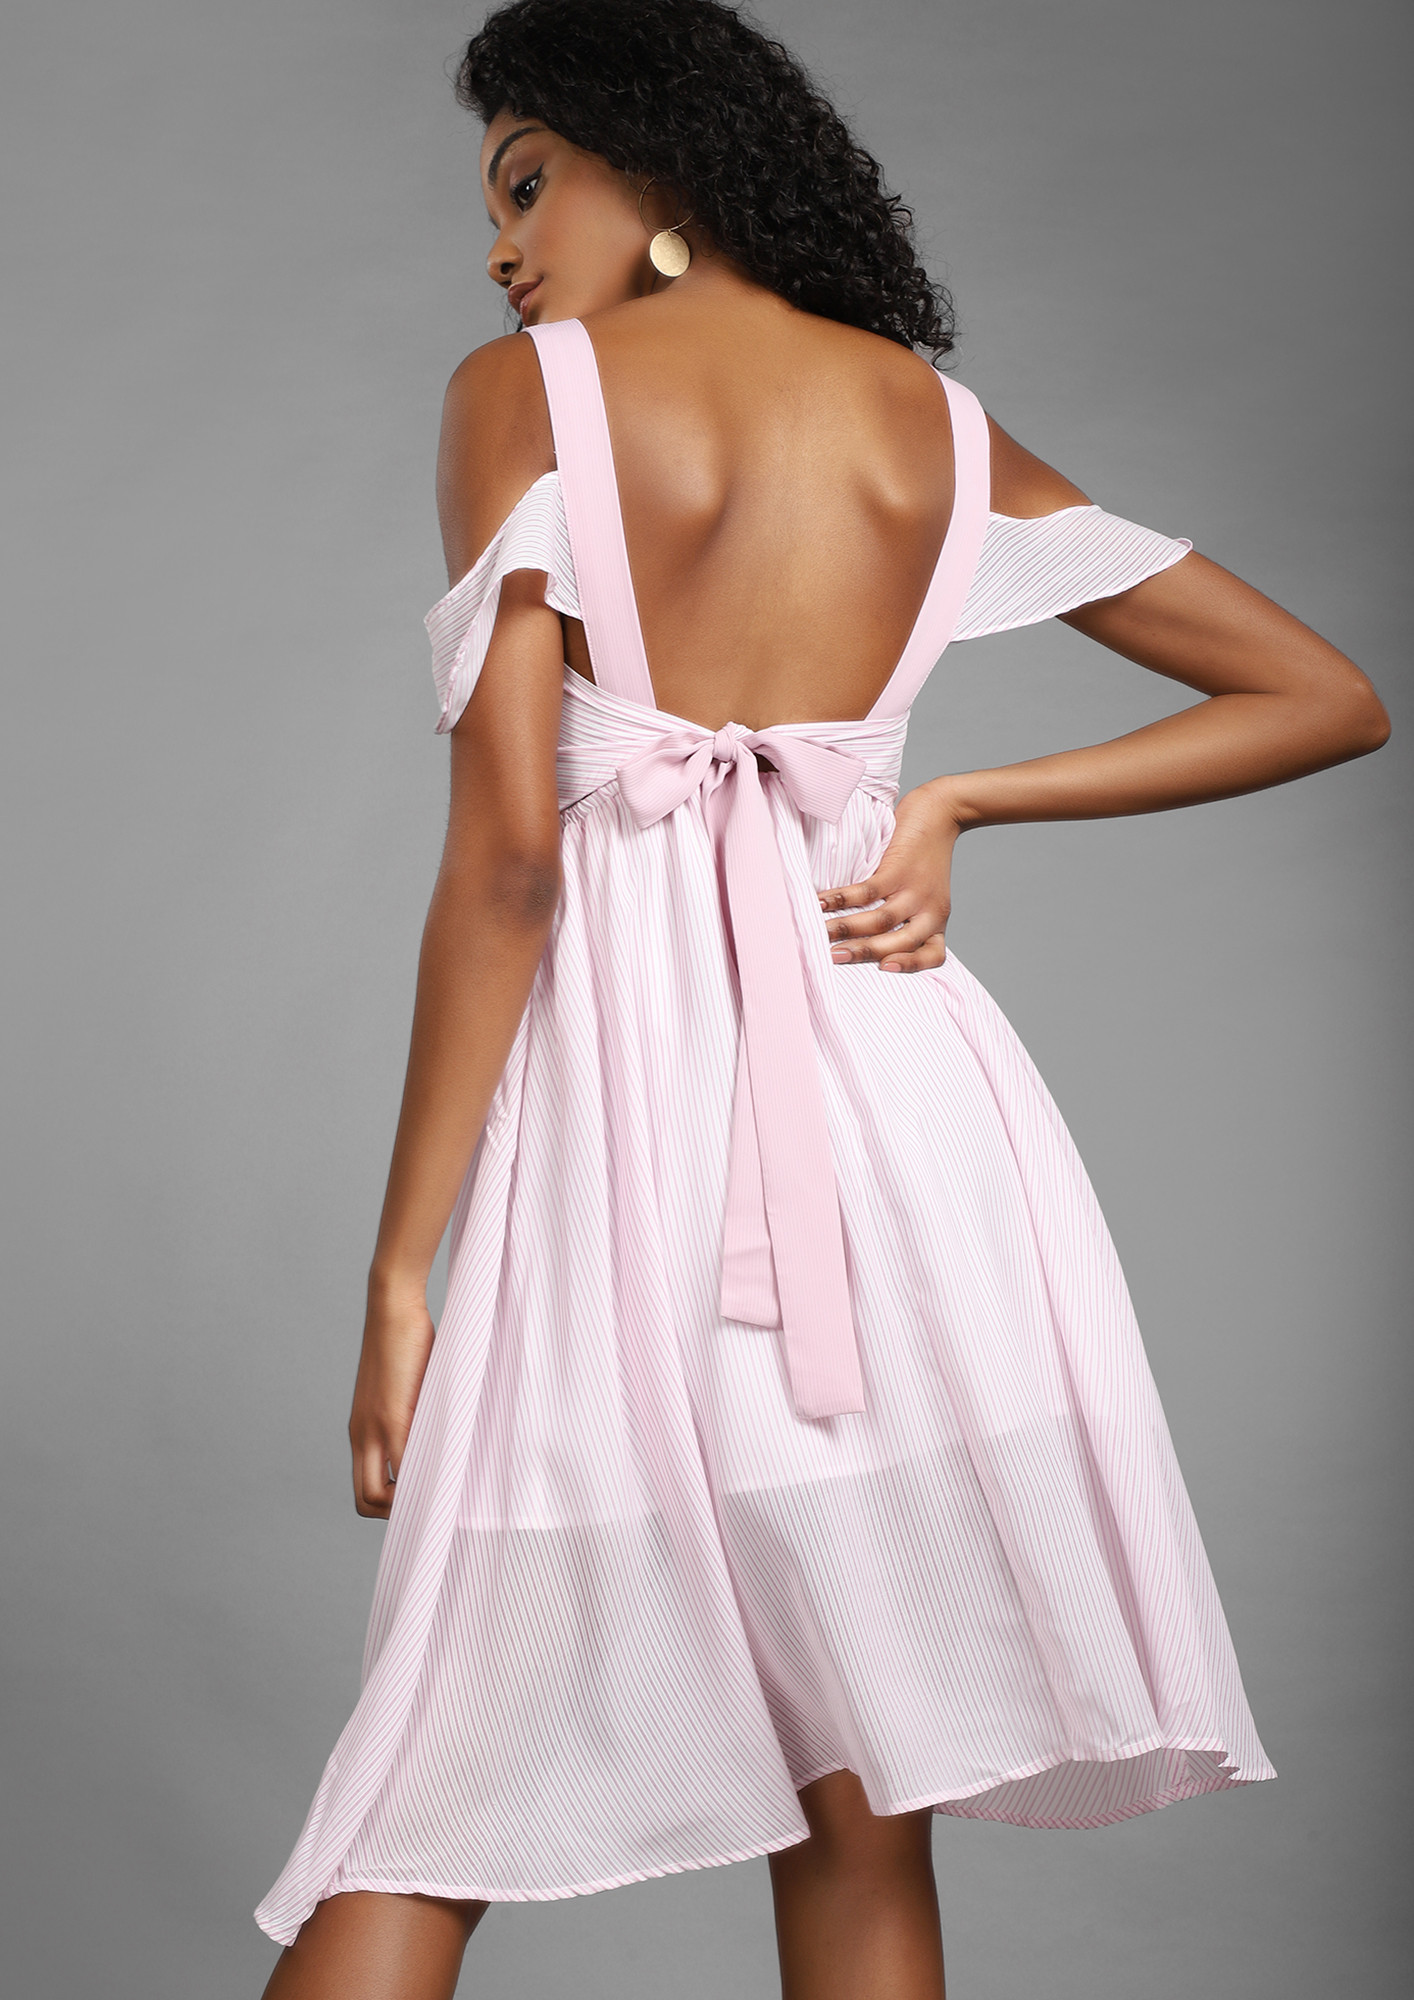 TWIRL AND SHOUT PINK SKATER DRESS